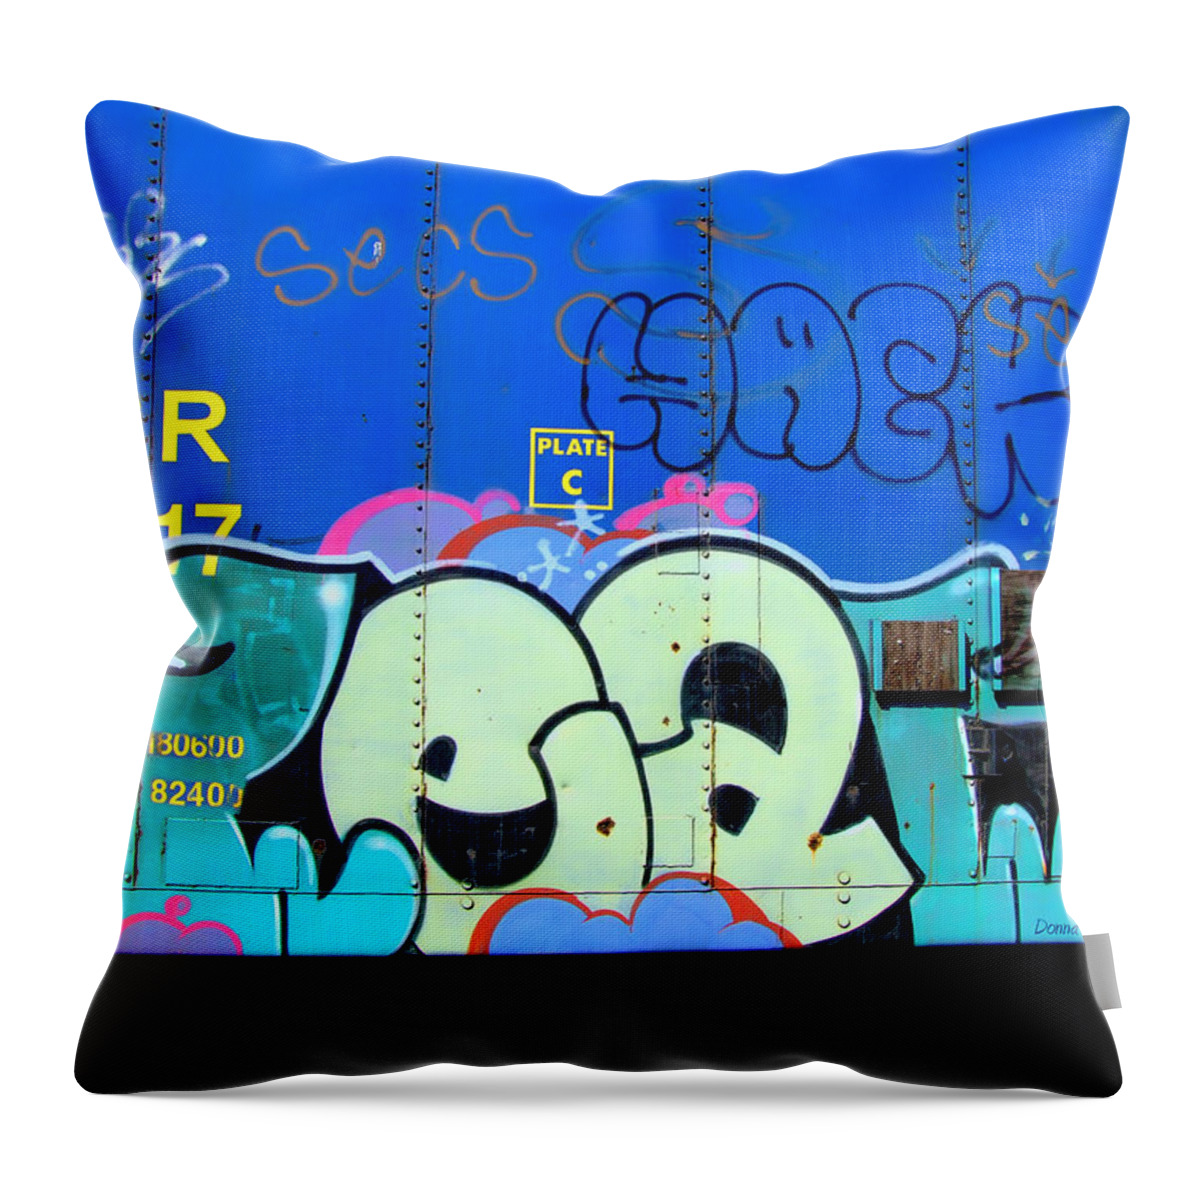 Graffiti Throw Pillow featuring the photograph Hack by Donna Blackhall